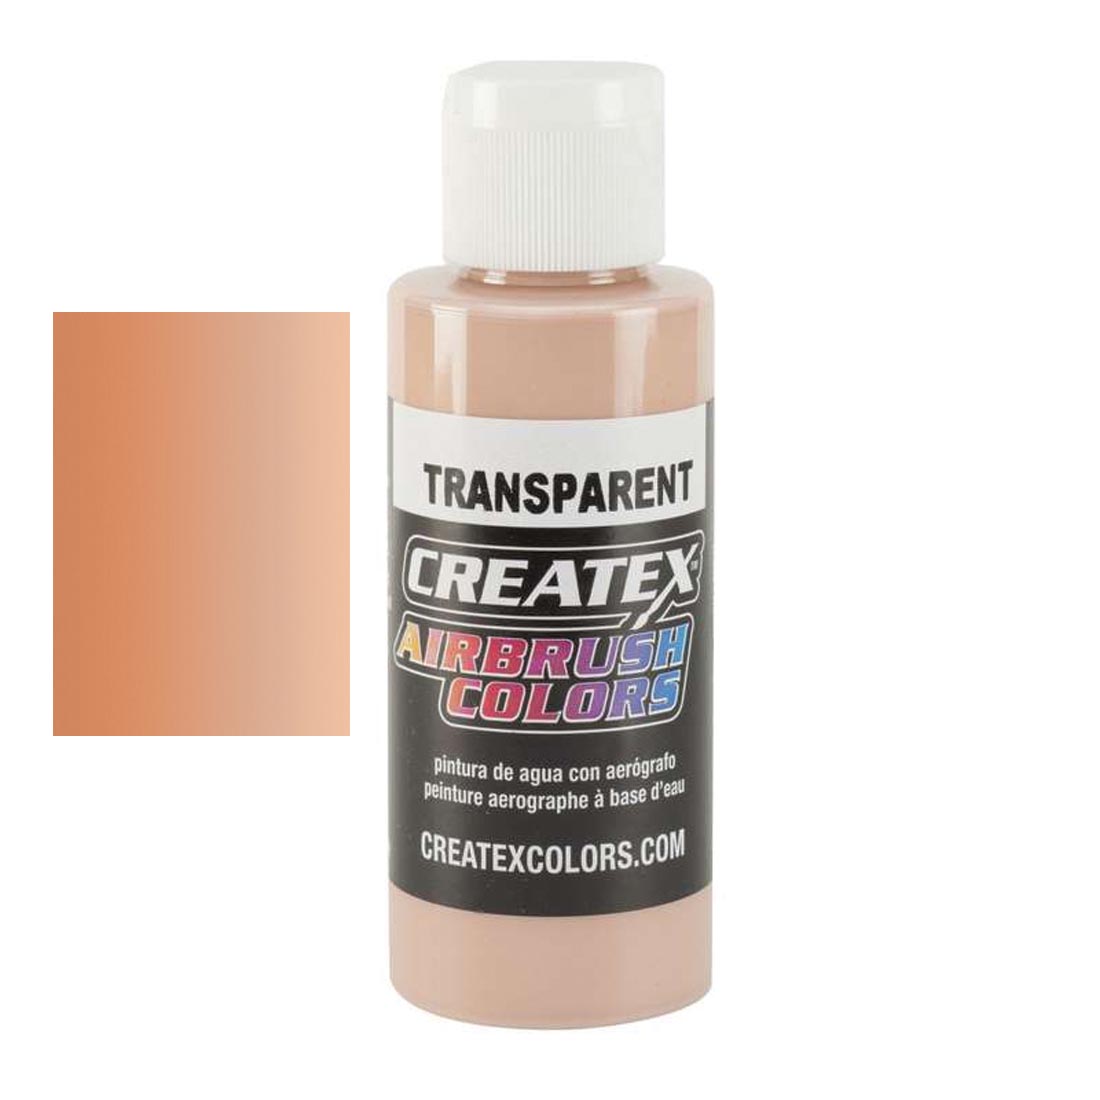 Bottle of Createx Airbrush Color Beside Transparent Peach Color Swatch